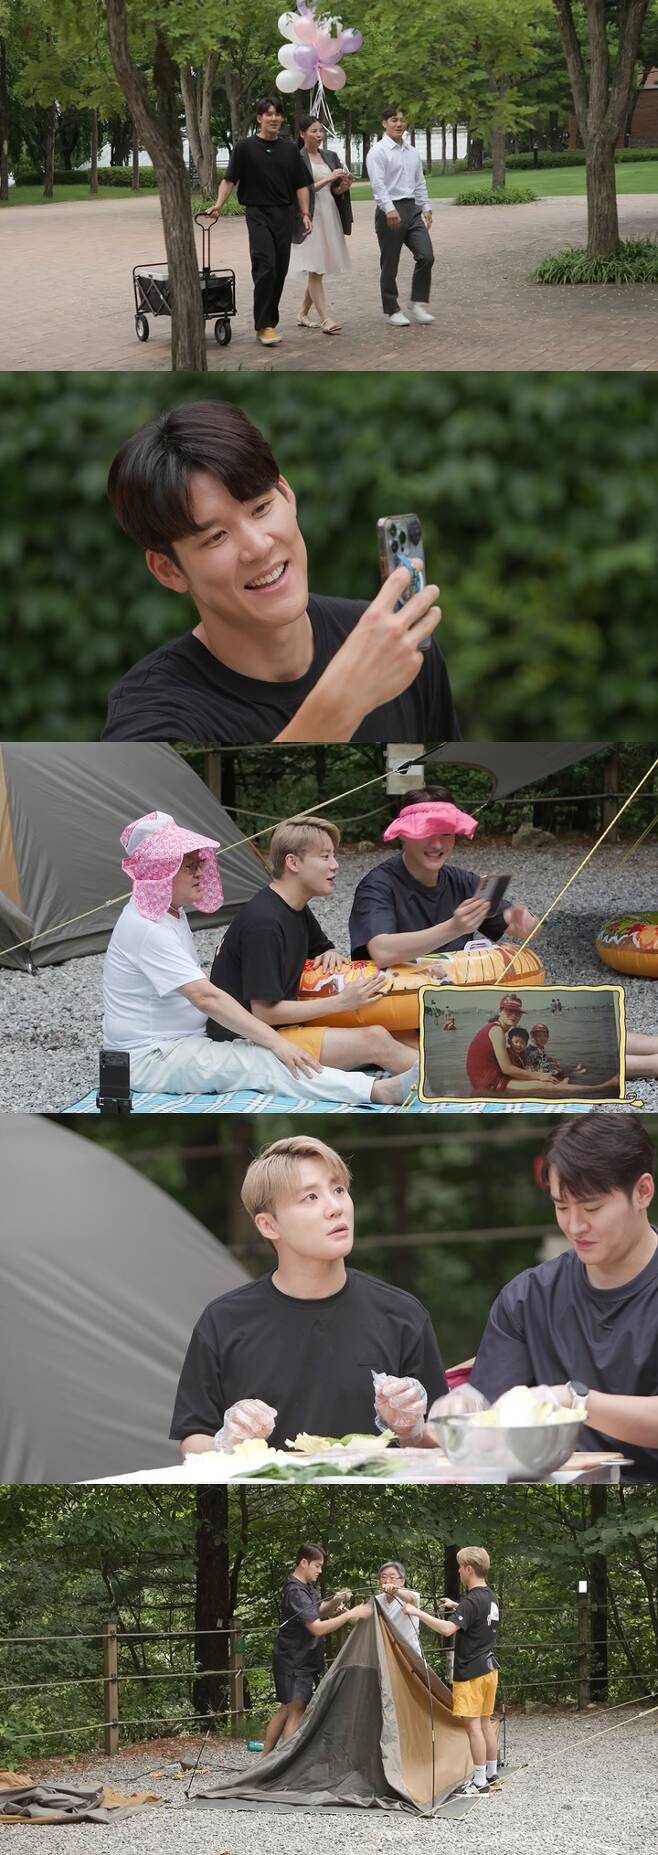 In the 28th episode of Channel A Mens Life - grooms class these days (hereinafter referred to as Grand Class), which will be broadcast on the 17th, the story of Park Tae-hwan, who is a wedding photographer of Kuk University Wrestler Hyo, and the scene of the Camping outing of Junsu Sambuza will be unfolded.Park Tae-hwan meets with his best friend, Hyun Woo, and bride-to-be, who are about to marriage.The question that Hyun Woo asked Park Tae-hwan, who is usually familiar with photography, for wedding photos. Park Tae-hwan works hard on shooting with various props.After a while, full-scale shooting begins, and Park Tae-hwan asks for a pose for the prospective couple, including the back hug.But the Hyun Woo couple starts the kiss and then panics Park Tae-hwan because he does not know how to fall with his lips attached.At first, he says, I can not see kissing because I take pictures. But eventually he suddenly says, Stop! Stop!As interest in the wedding shoots is gathering, the camping scene of Junsu Sambuza is followed.On this day, the brothers Jun-ho and Jun-ho receive a special groom class from installing tents to cooking wheat oil, and they also make fun memories by taking back old photos.Son Hoyoung praises the harmonious atmosphere of the Junsu family, saying, If you look at it today, you will think that you want to be a member of the compliance family.Soon, Sambuza will show Camping food with a lot of prizes made with its own wheat oil and barbecue.Junsus father tells his wife about his love story, When he proposes (to his wife), he says, If you and marriage, I will have a good second generation.Furthermore, Sambuza continues its realistic and exciting marriage talk, making the ears of the cast members before the Grand Class prickle.In addition to this, Son Hoyoungs counseling scene, which visited marriage information company, and Shin Bong-sun, who made a double date with the arrangement of Mo Tae-beom and Im Love couple, and the meeting of Im Love Nam Sa-chin Valerino.Meanwhile, Mens Life - grooms class these days will be broadcast at 9:20 pm on the 17th.Photo = Channel A Mens Life - grooms class these days